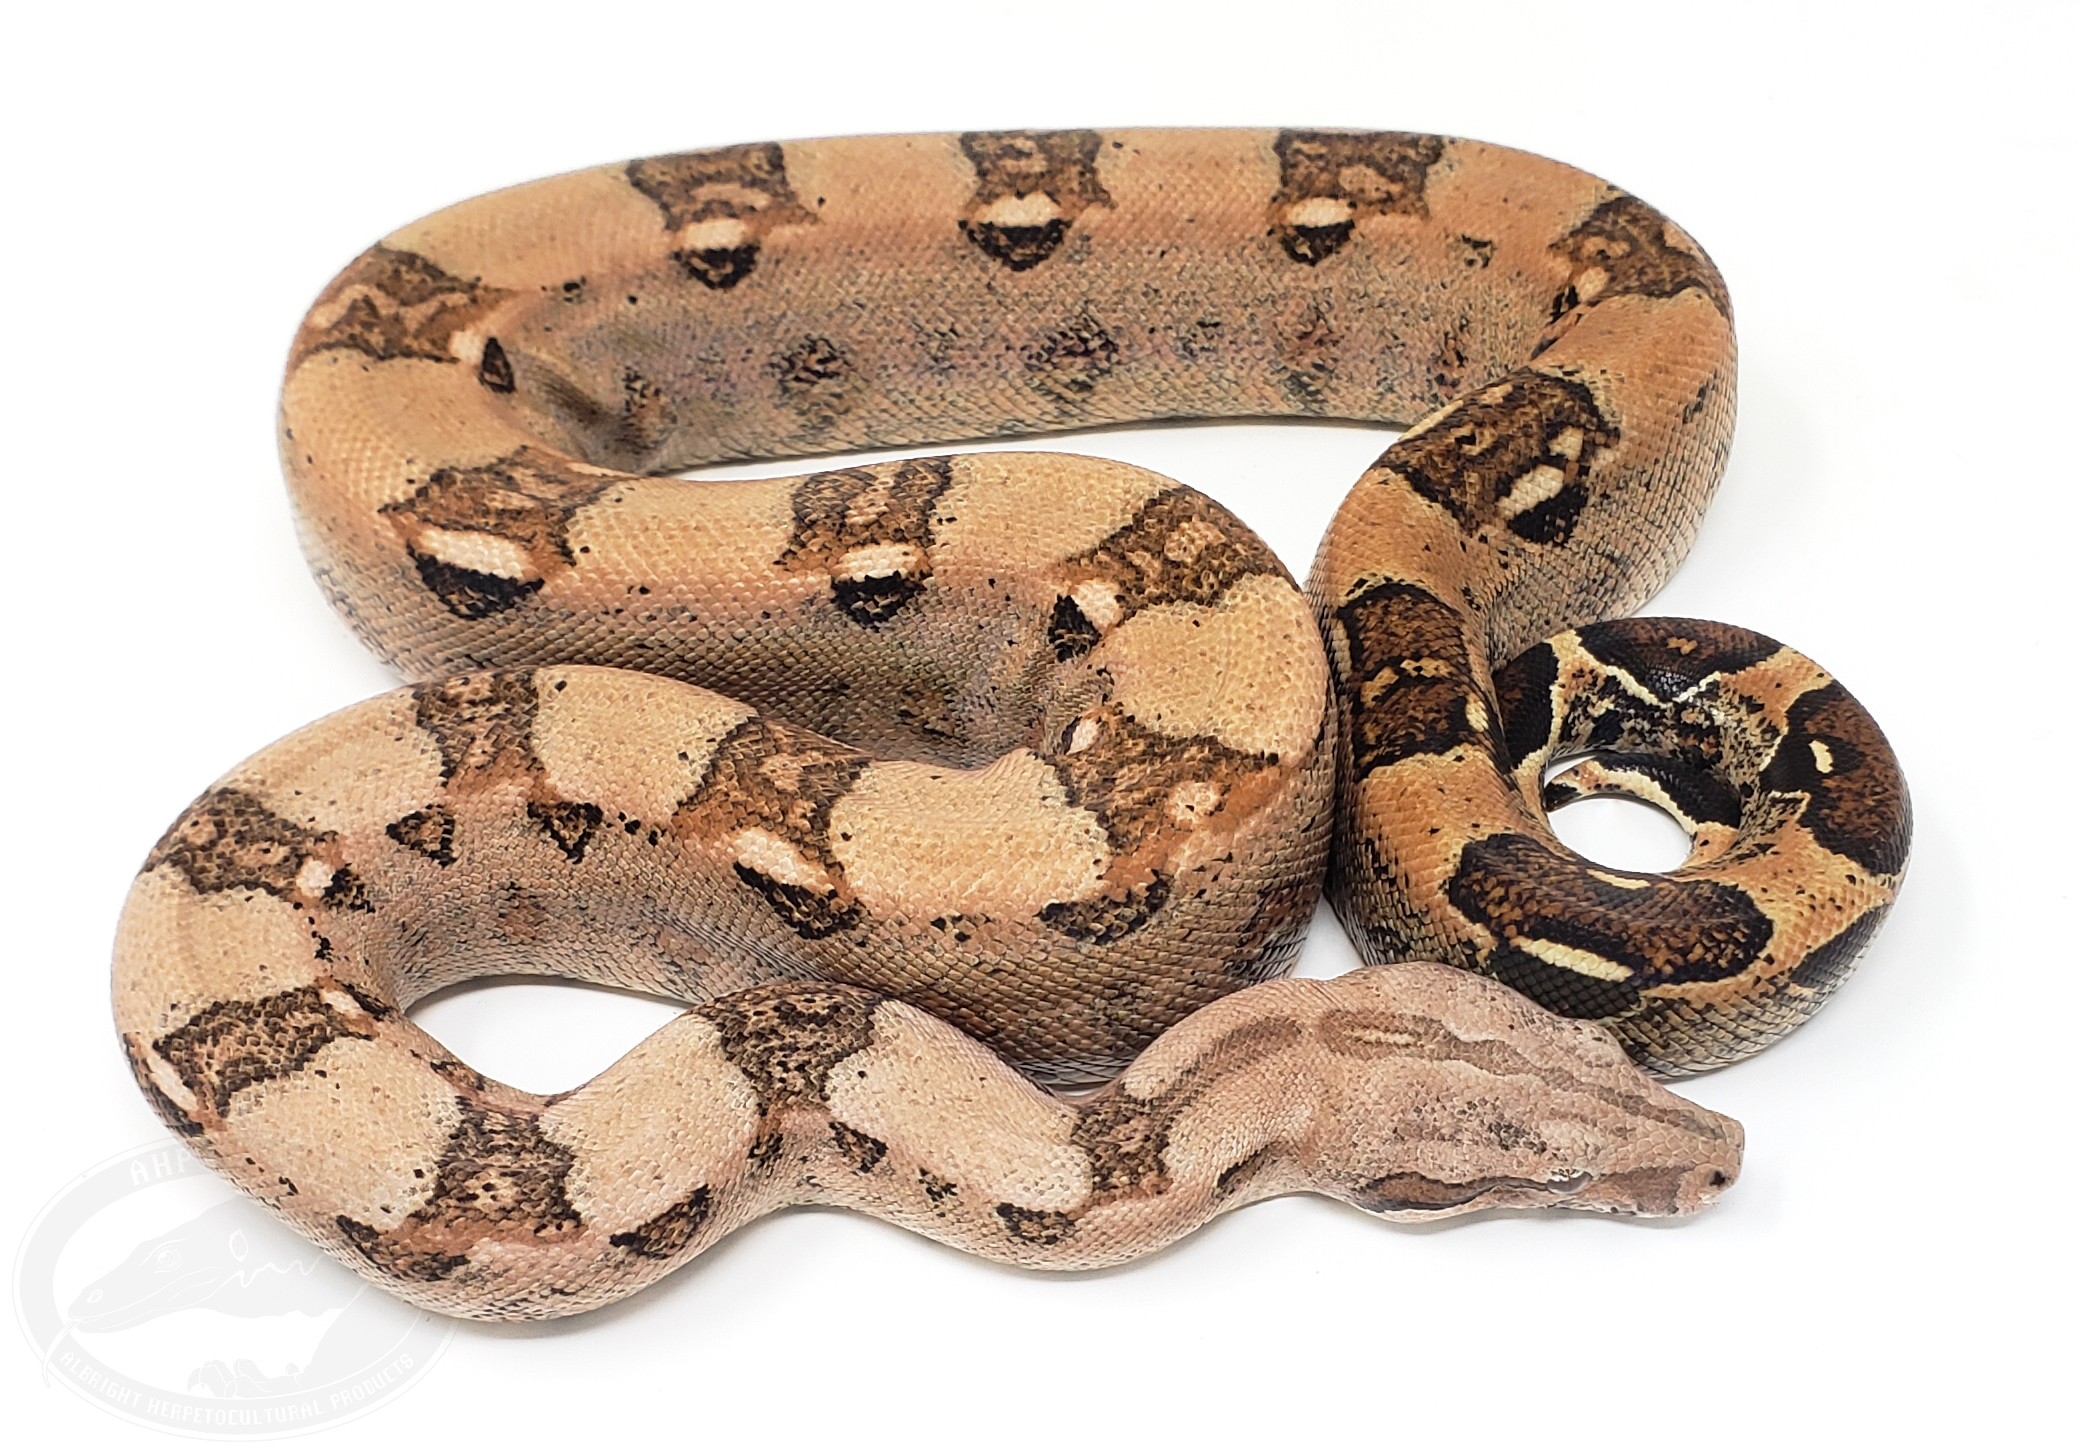 Kubsch Pastel Boa Constrictor by AHP Exotics